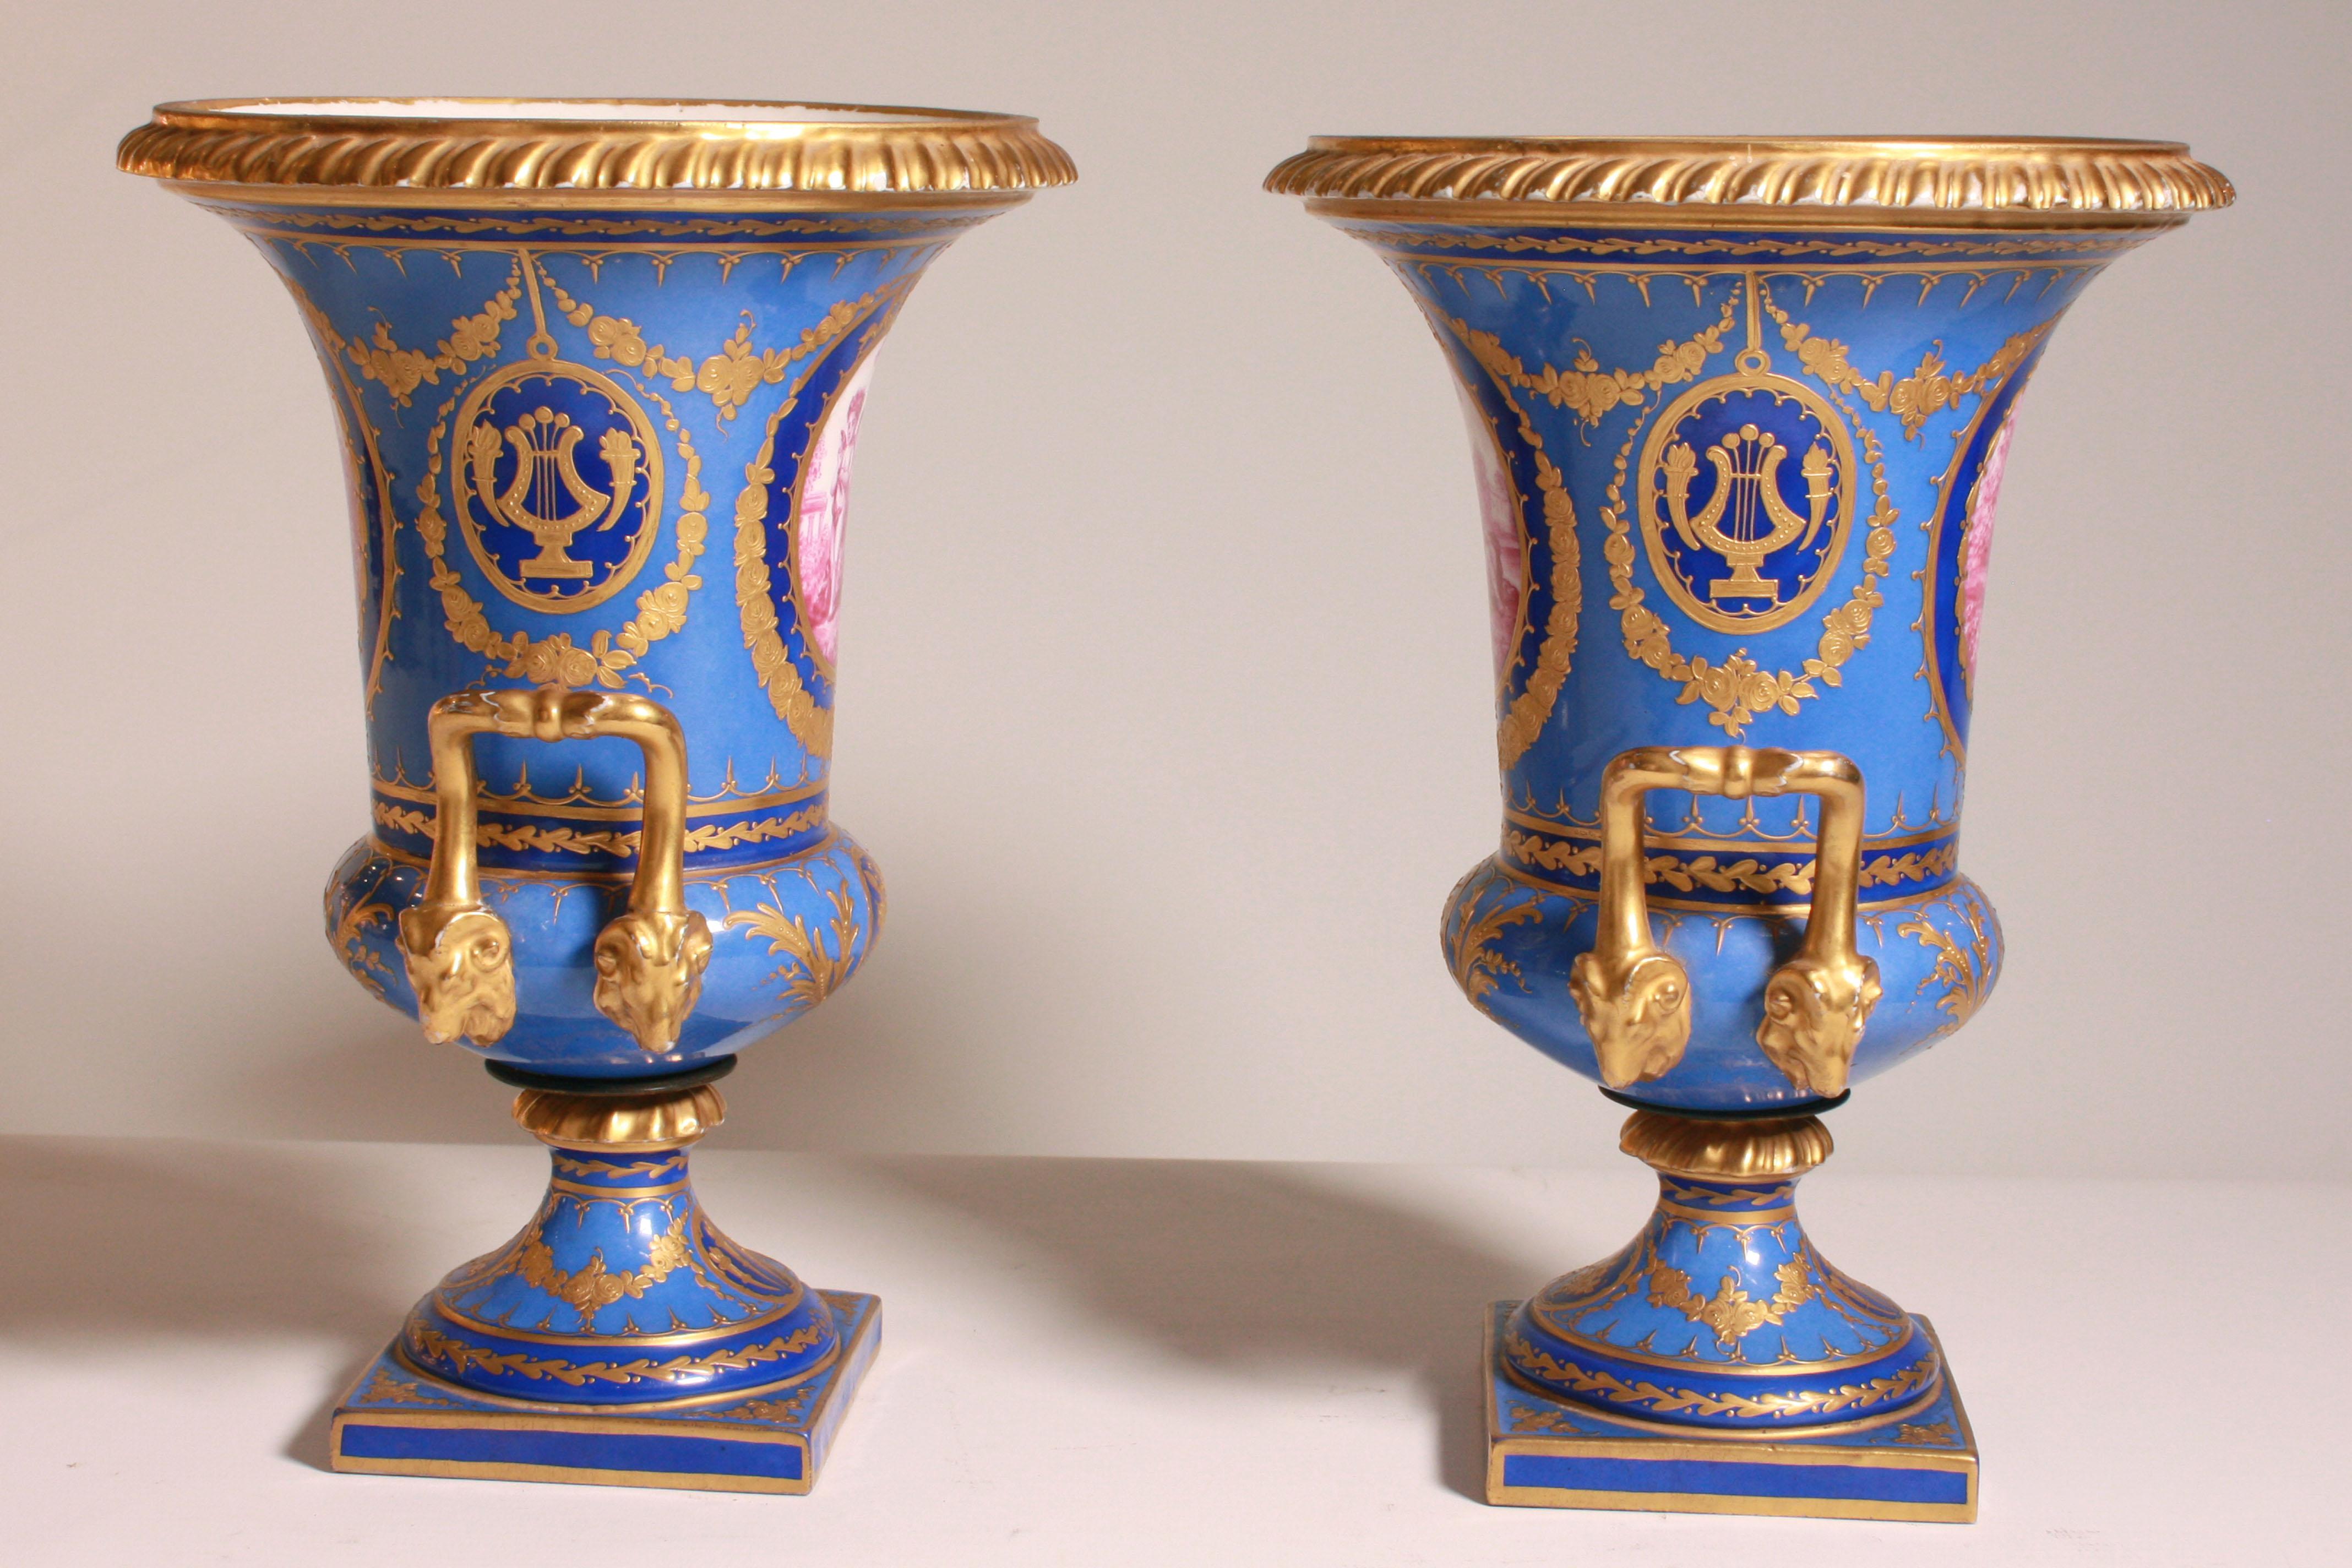 Antique Pair of Sèvres Vase French, 1772 For Sale at 1stDibs